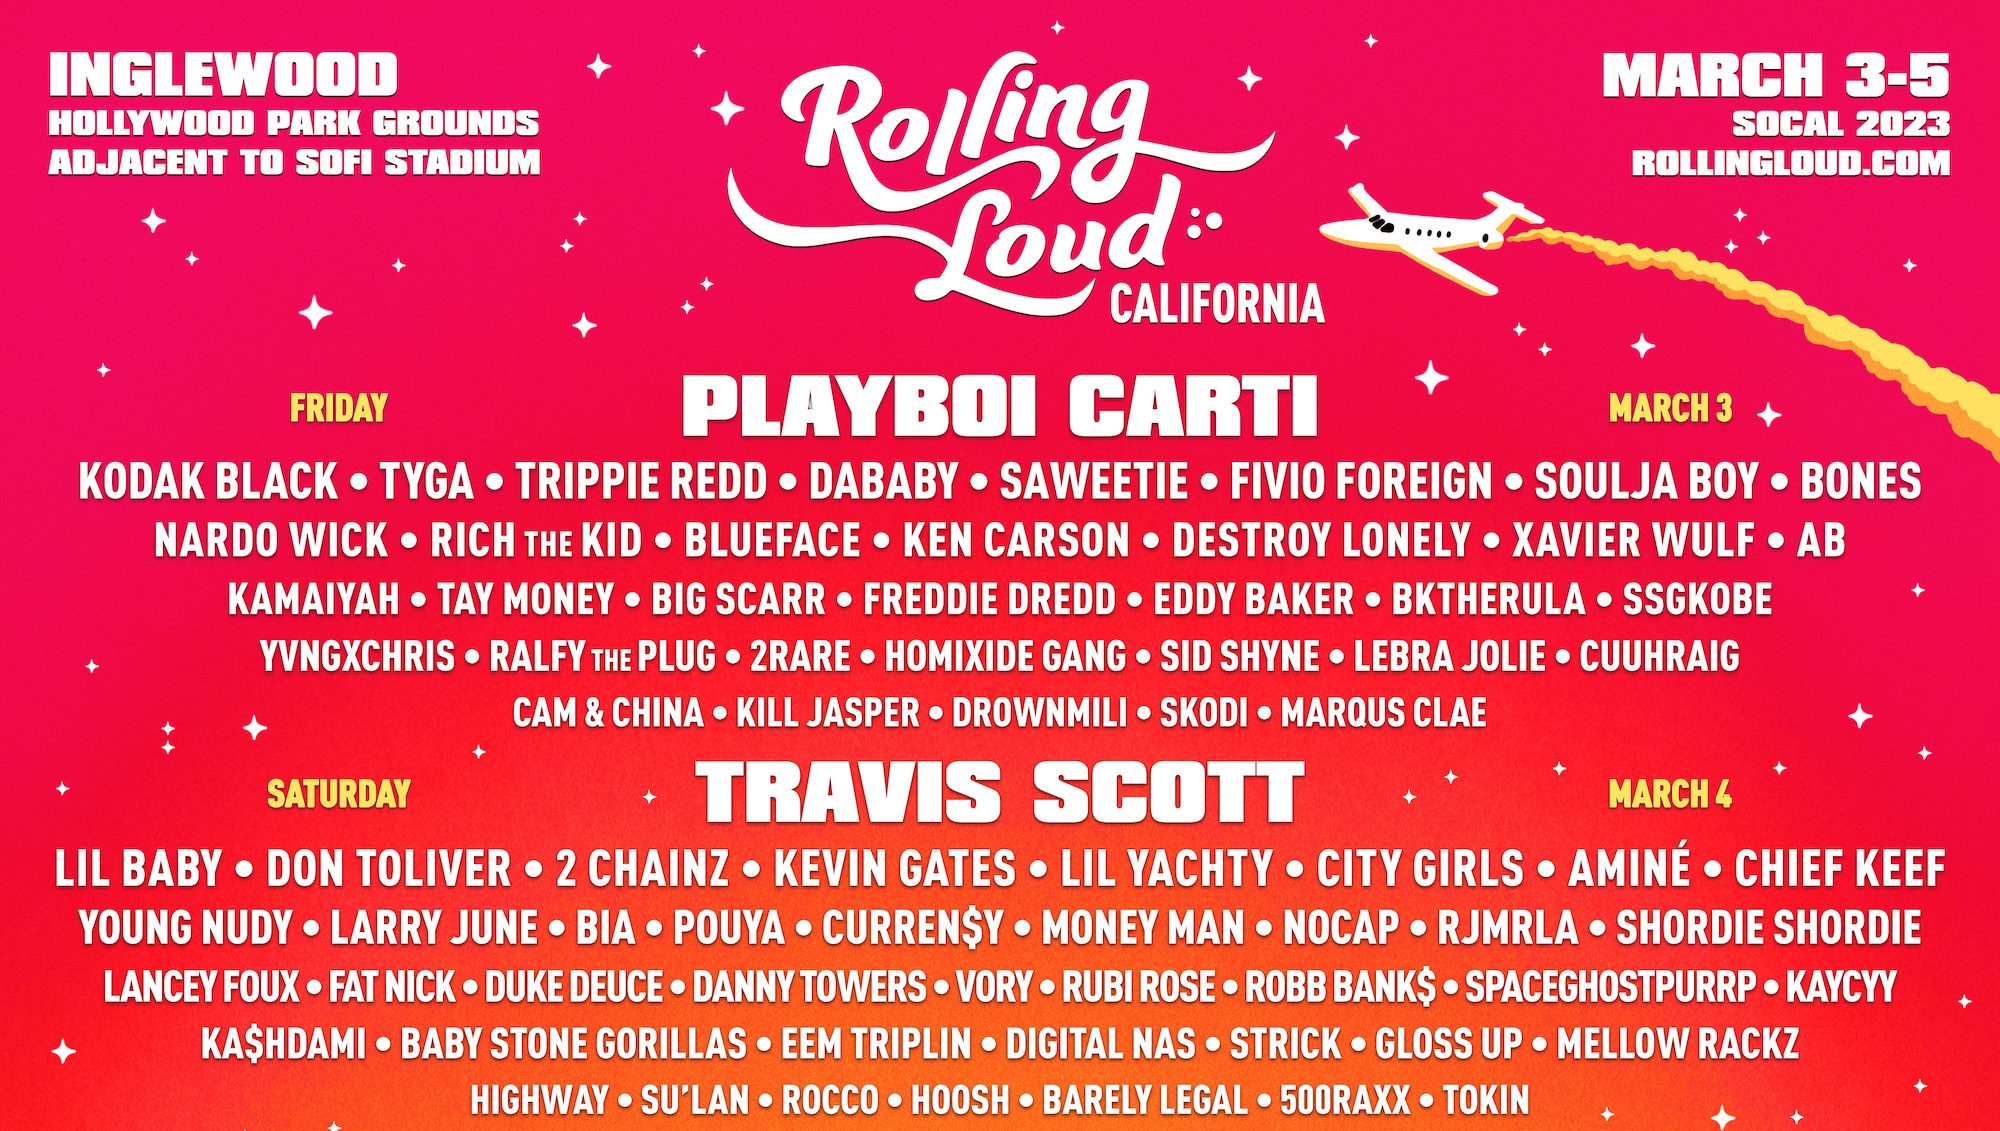 For the Culture. — Playboi Carti performing at Rolling Loud